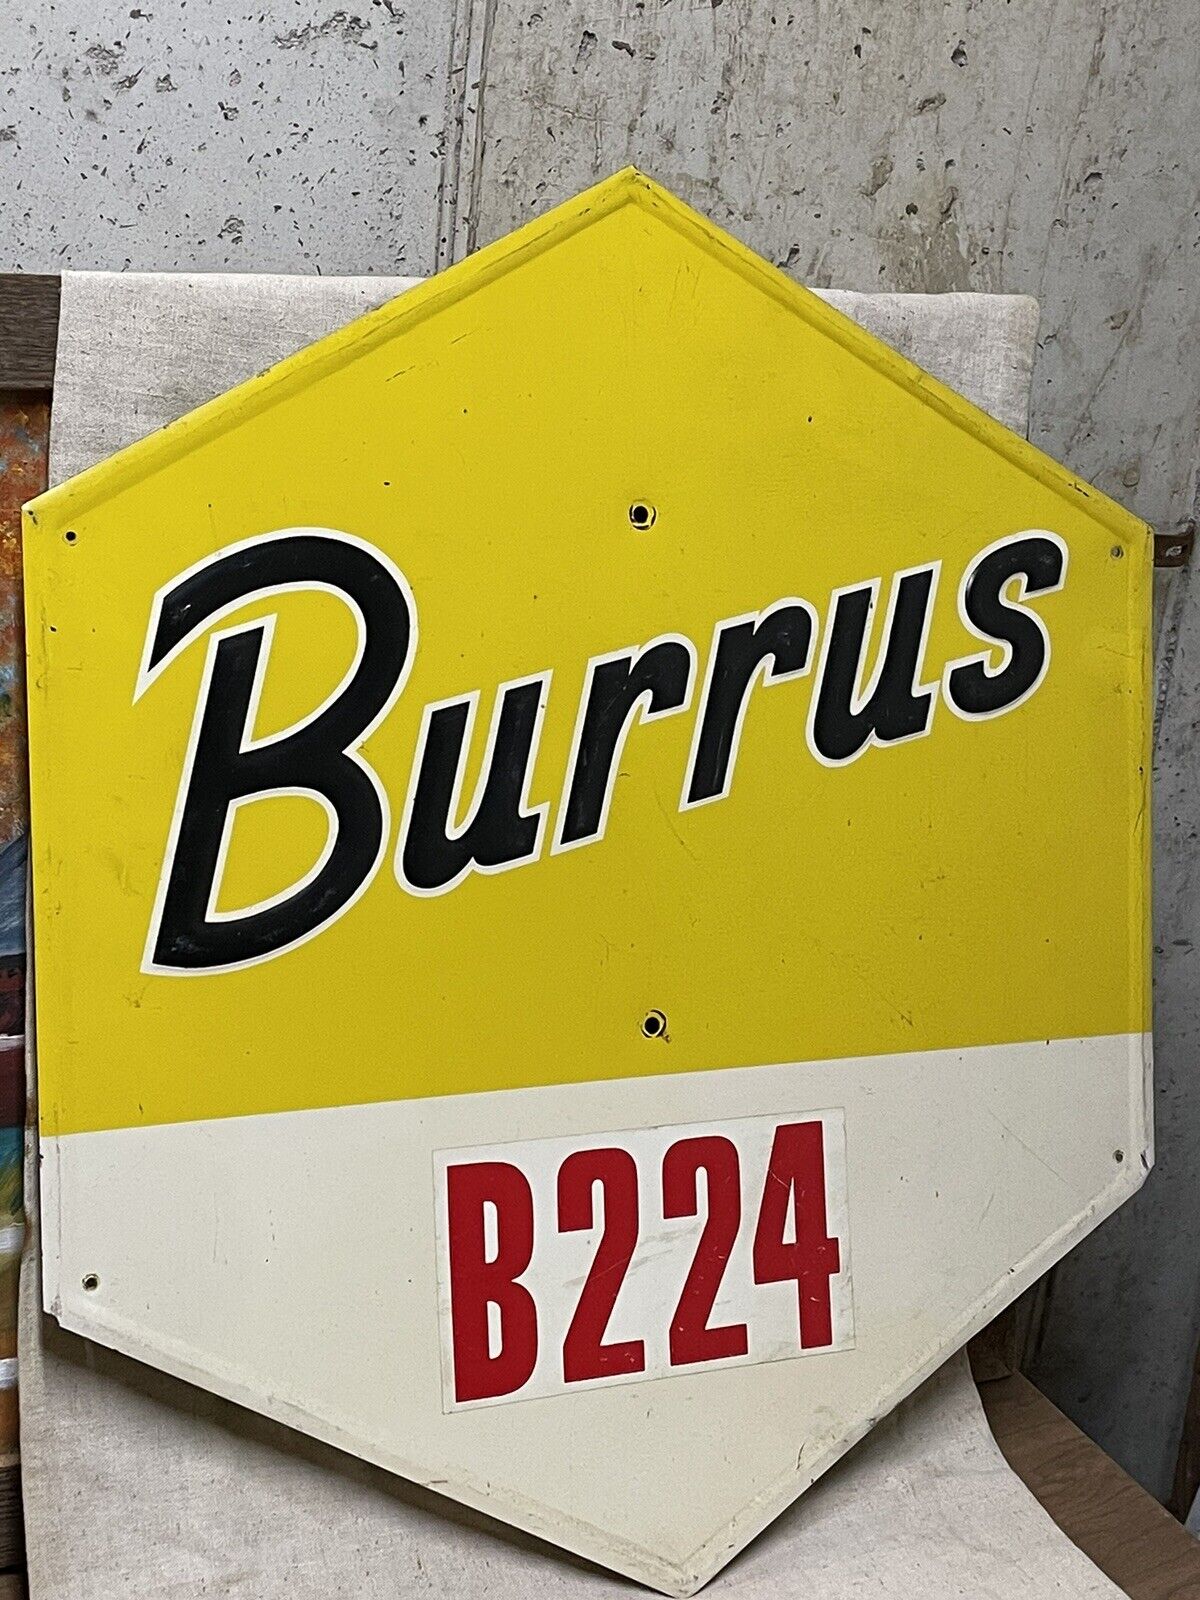 Burrus Hybrids Arenzville IL Sign, Vintage Metal Advertising Seed Sign Rare